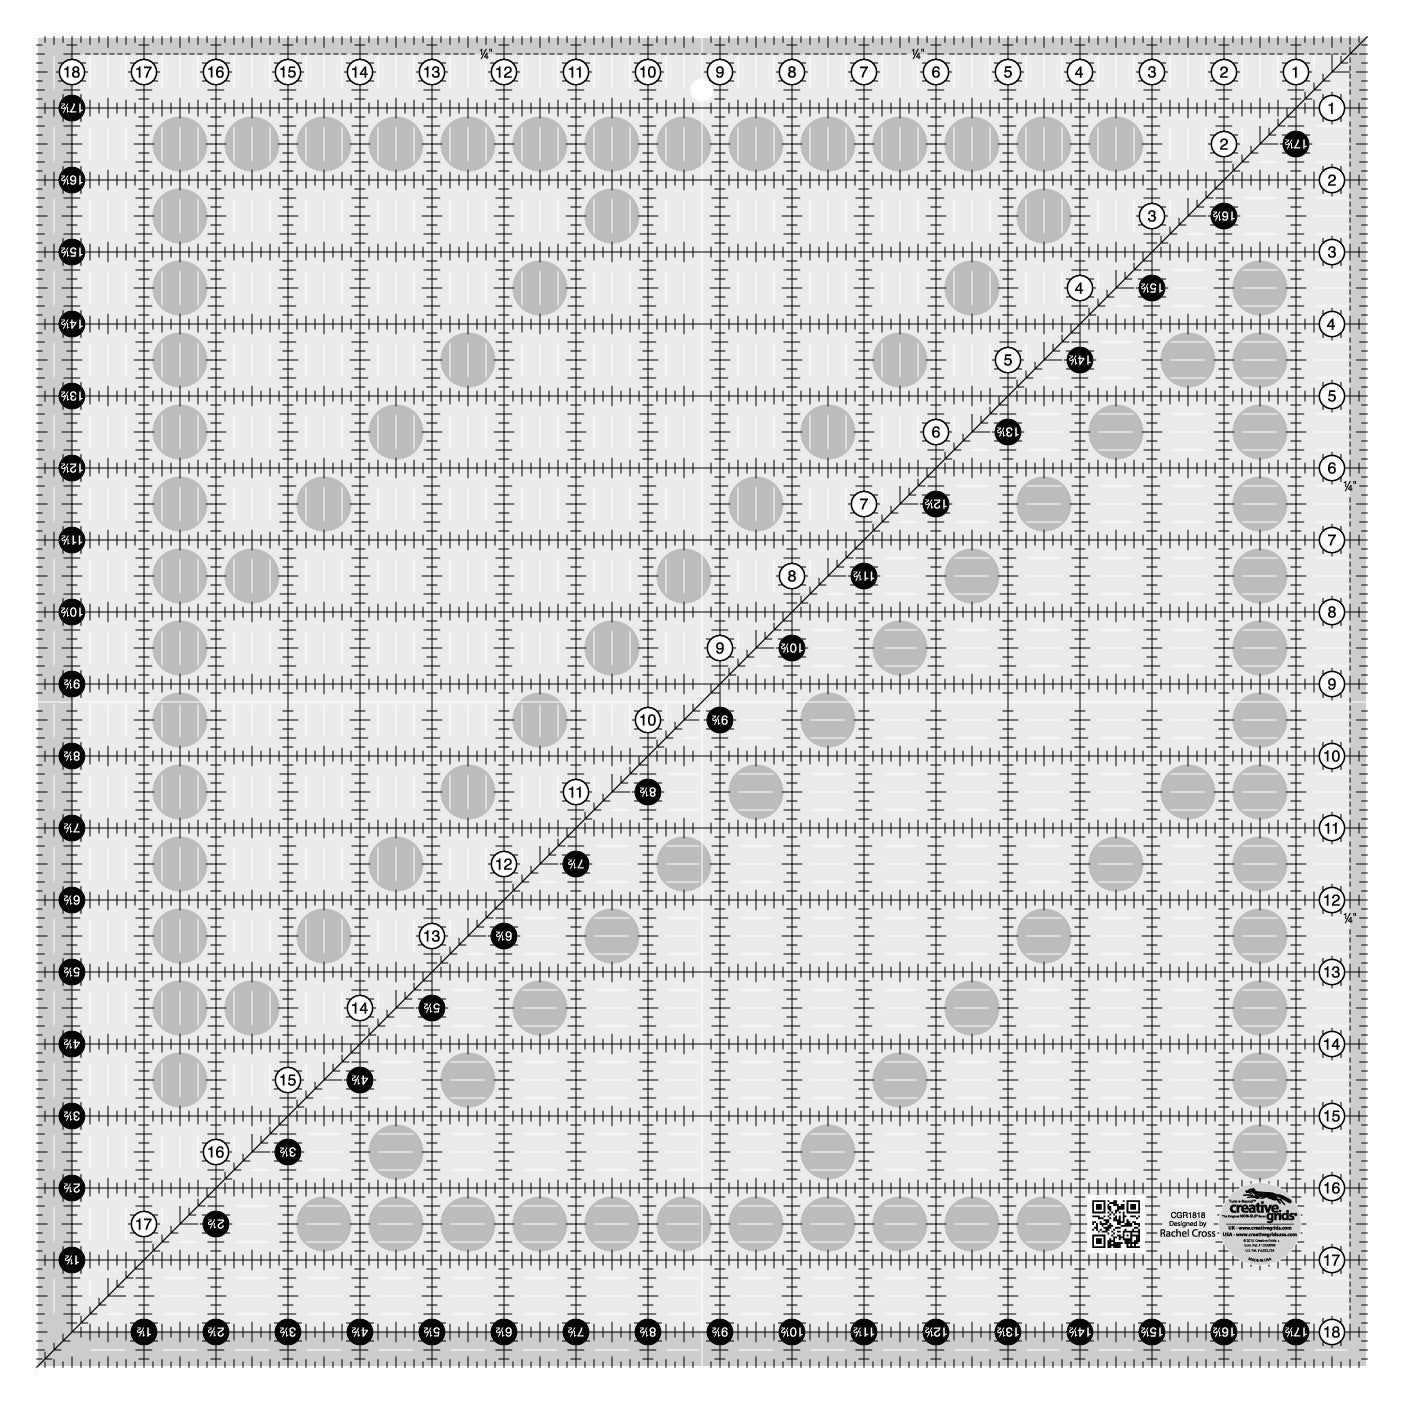 Creative Grids 18-1/2-Inch Square Quilt Ruler (CGR1818)